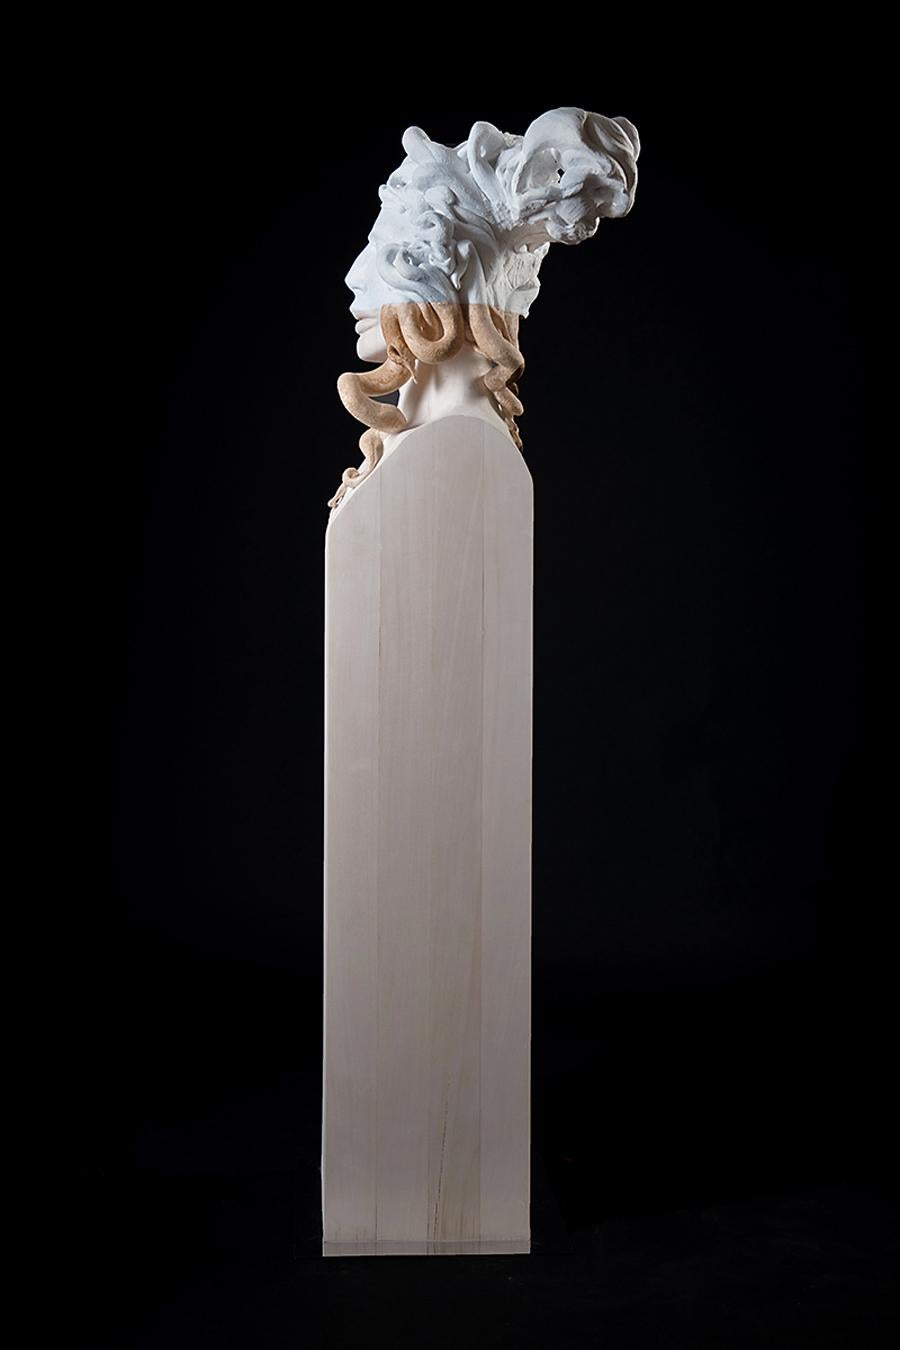 striking hand carved Carrara marble and linden wood sculpture by contemporary Italian sculptor Lorenzo Vignoli, incorporating classical references and Greek mythology influences

Medusa by Lorenzo Vignoli (2003)
hand carved Carrara marble + Italian